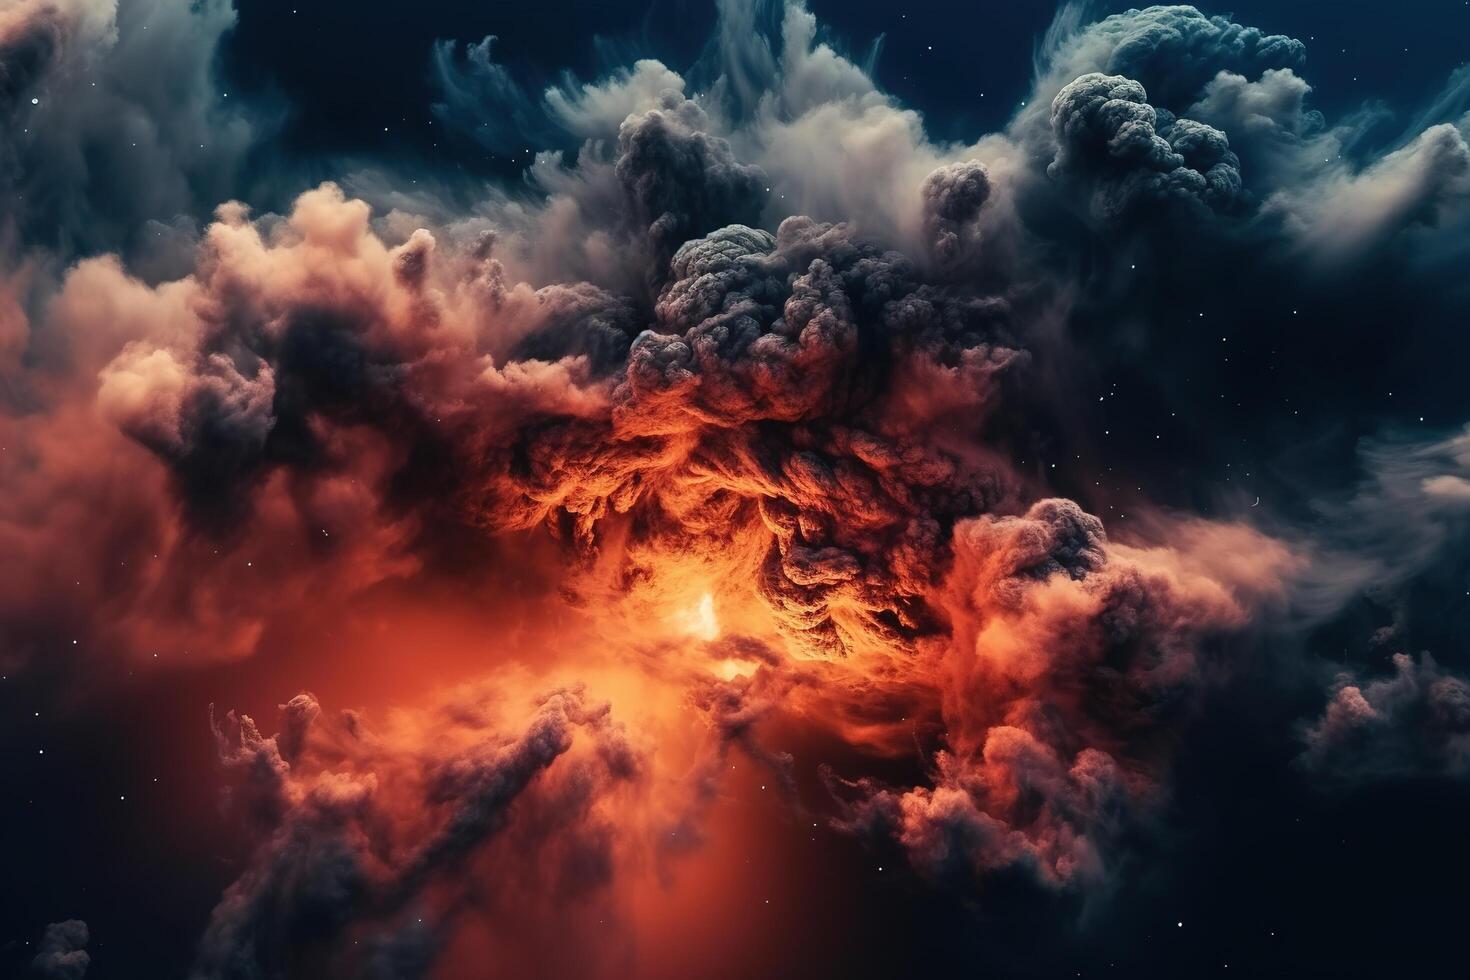 Fire Burning Cloud in Space Illustration Background with photo